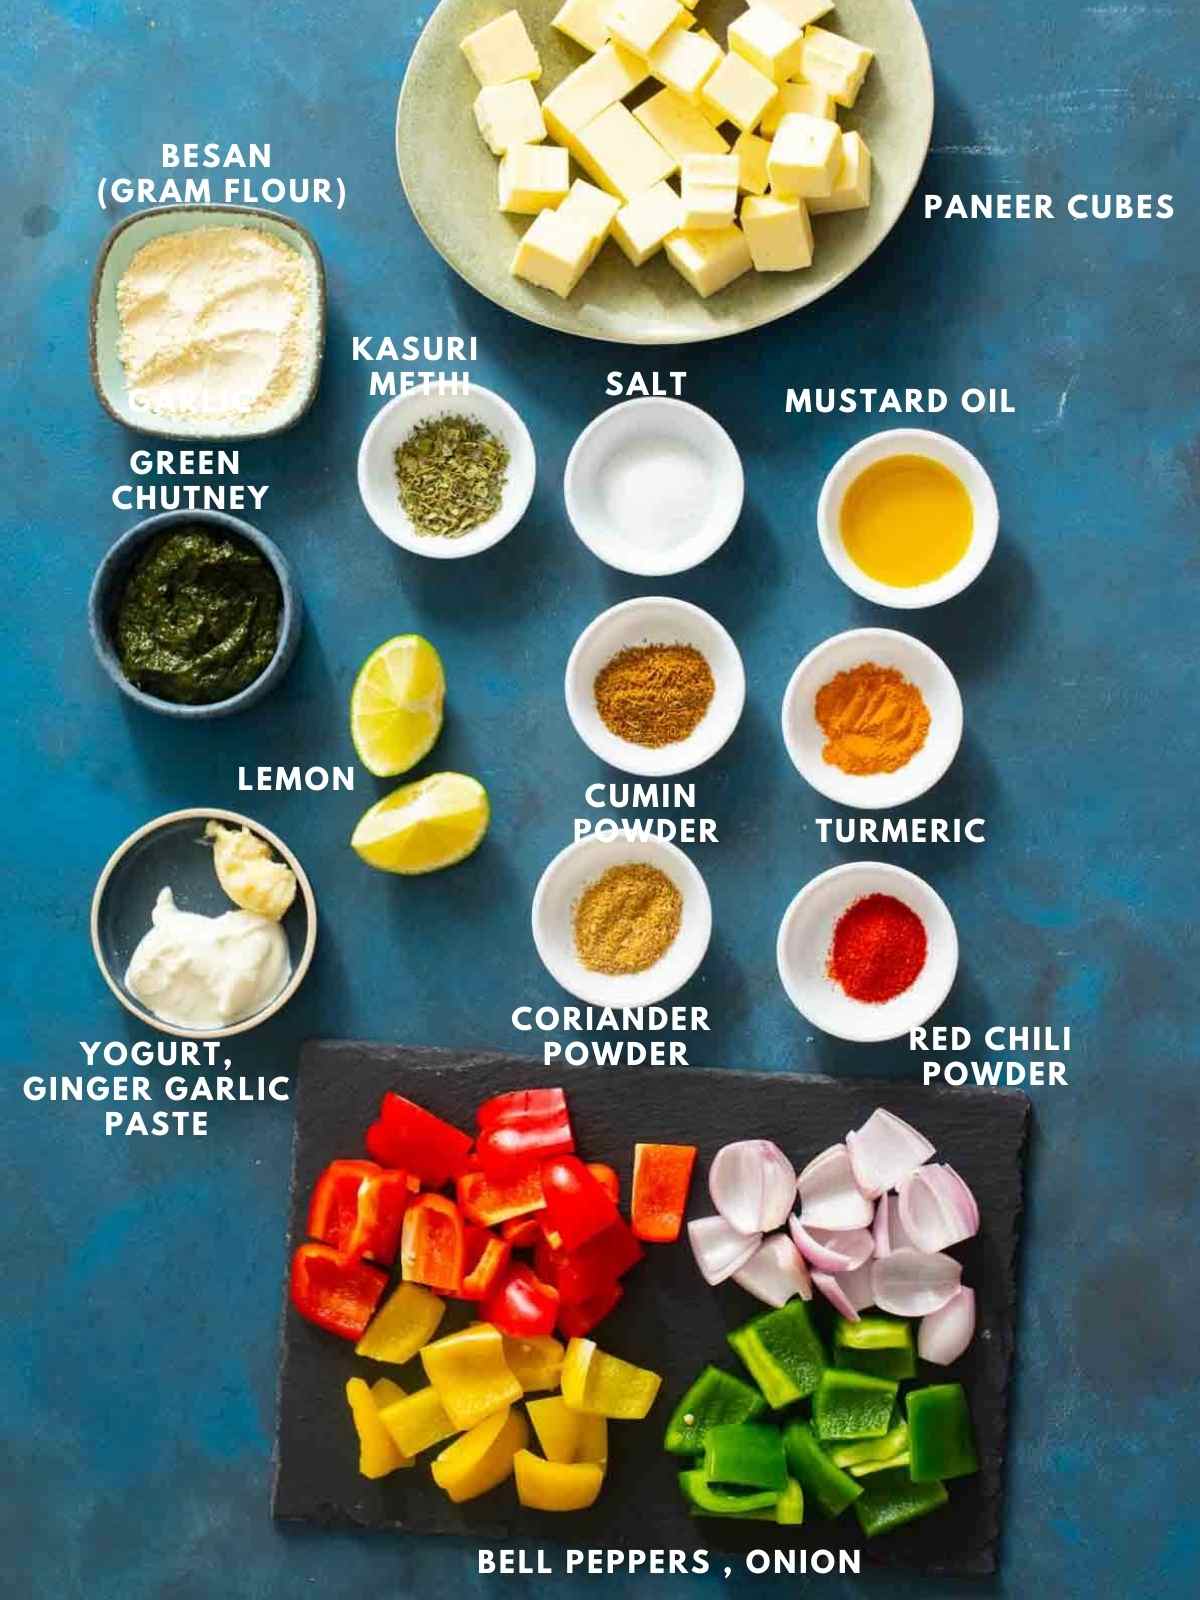 all ingredients for paneer kathi roll